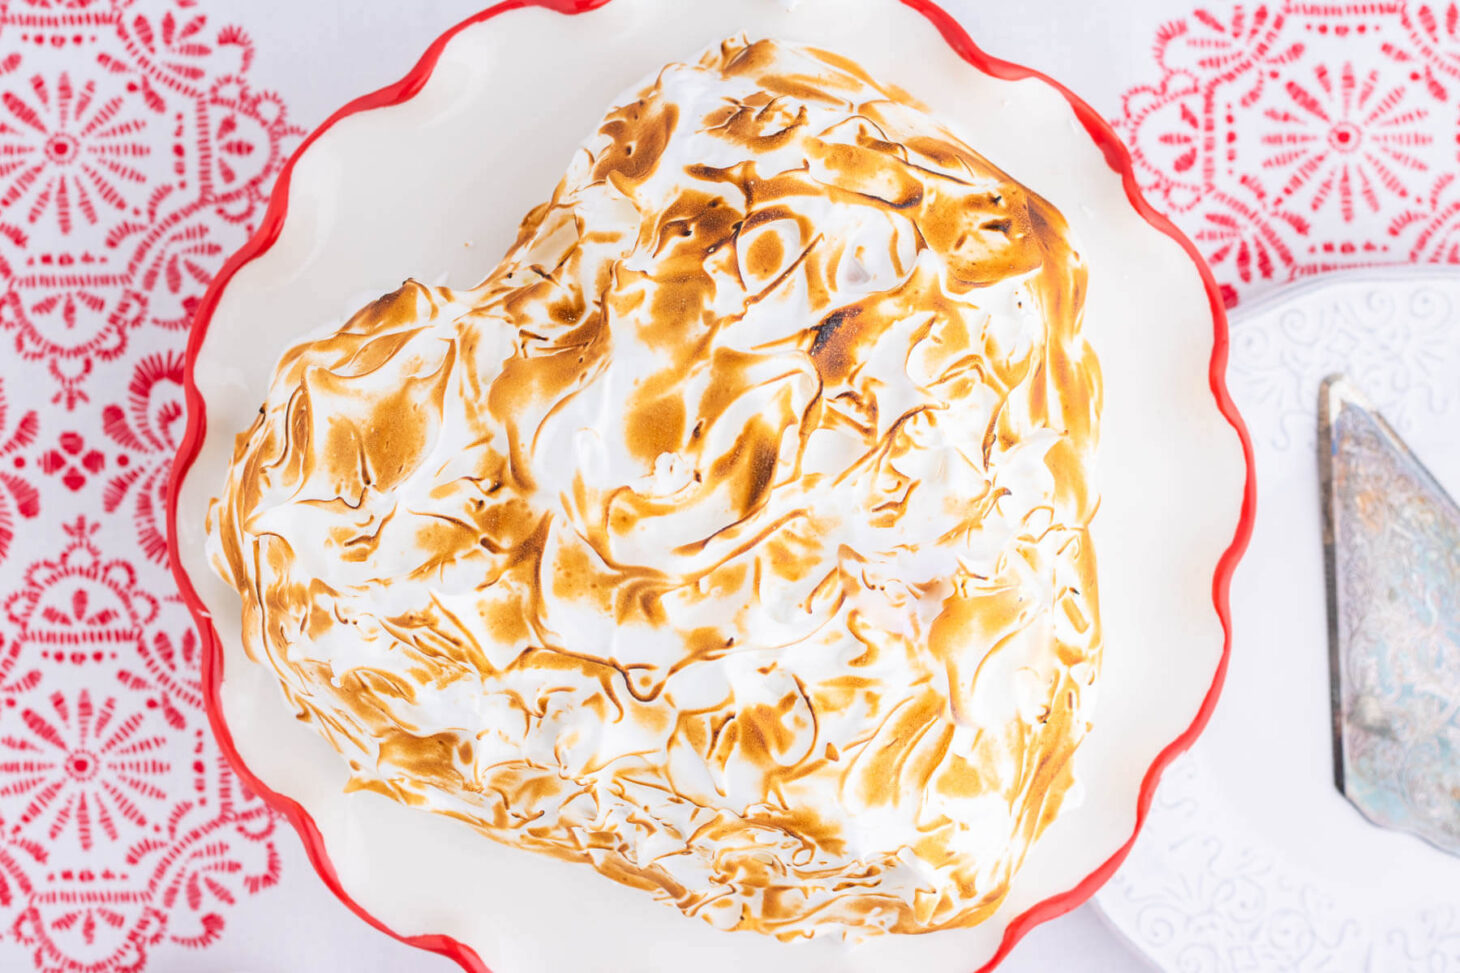 A heart shaped Baked Alaska covered in caramelized meringue on a red rimmed plate.